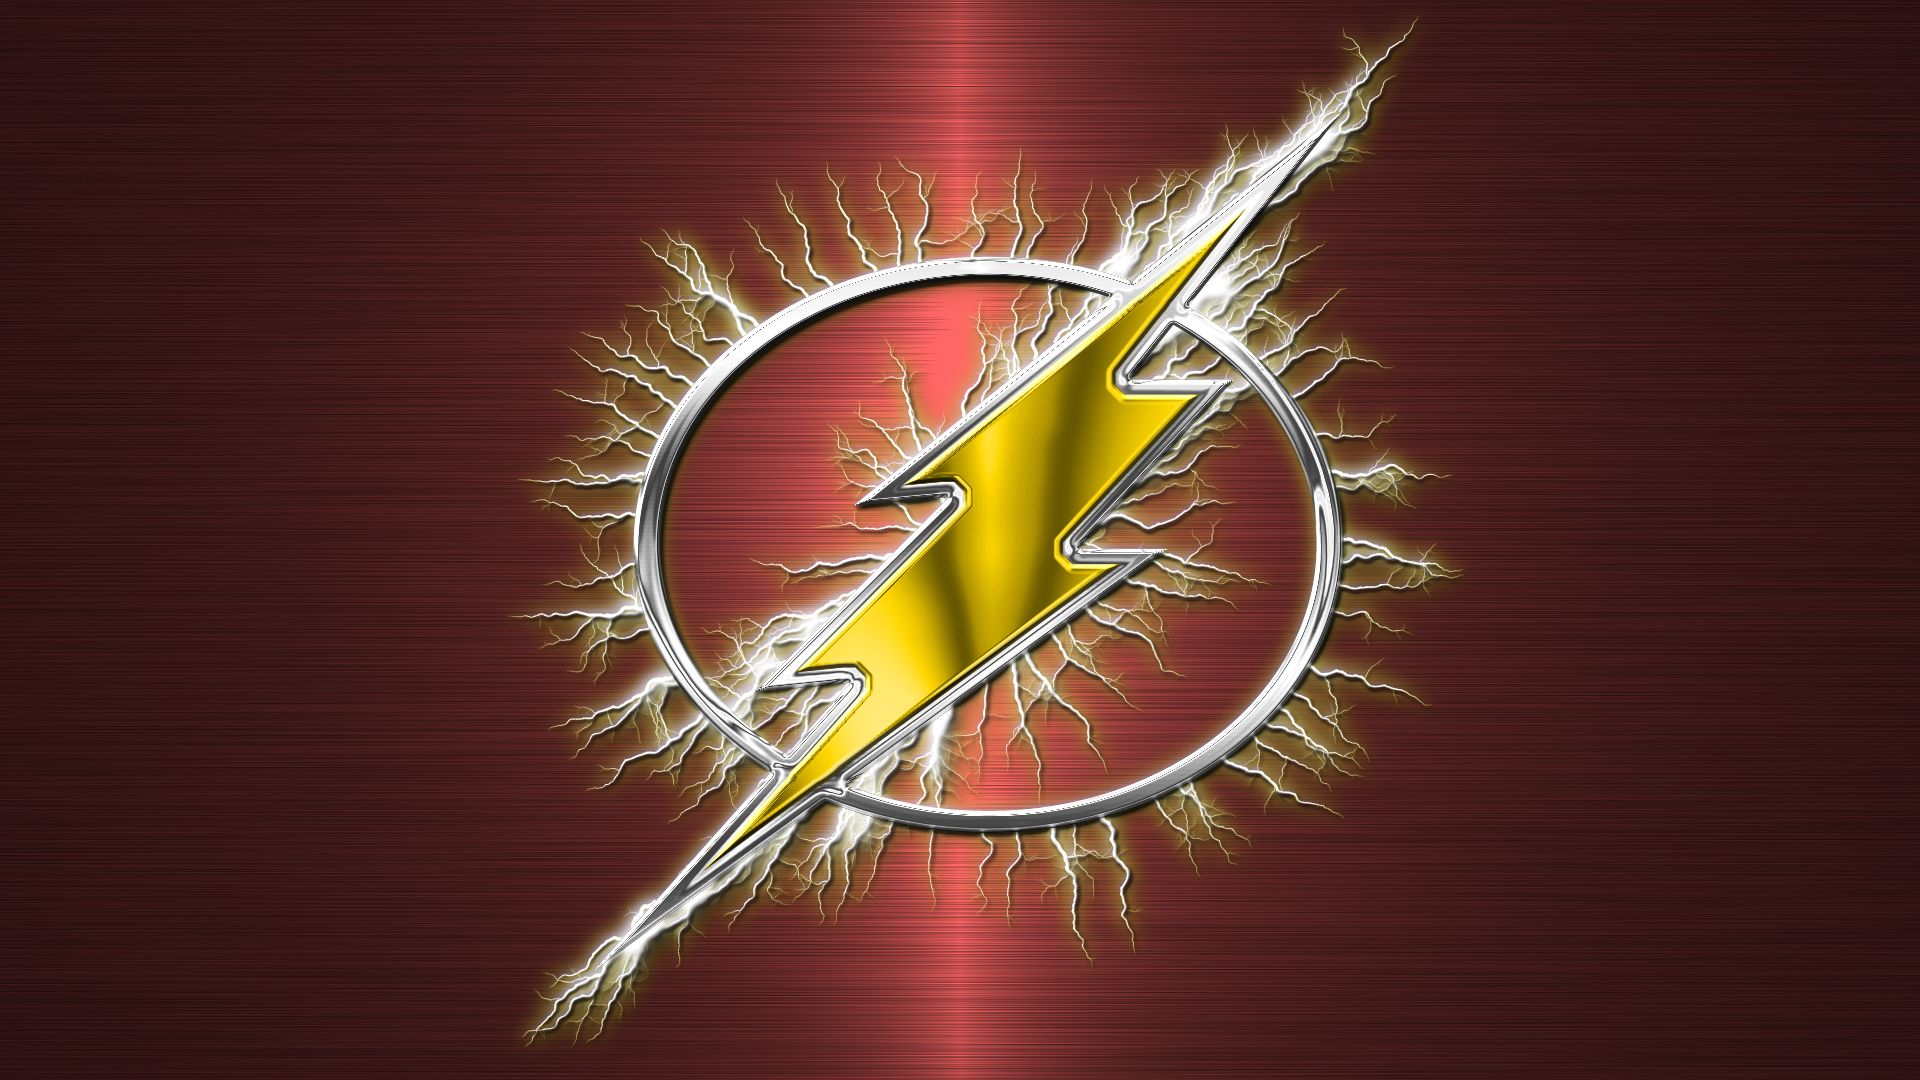 Awesome Flash Background. Flash Wallpaper, Fourth of July Flash Wallpaper and Arrow Flash Wallpaper